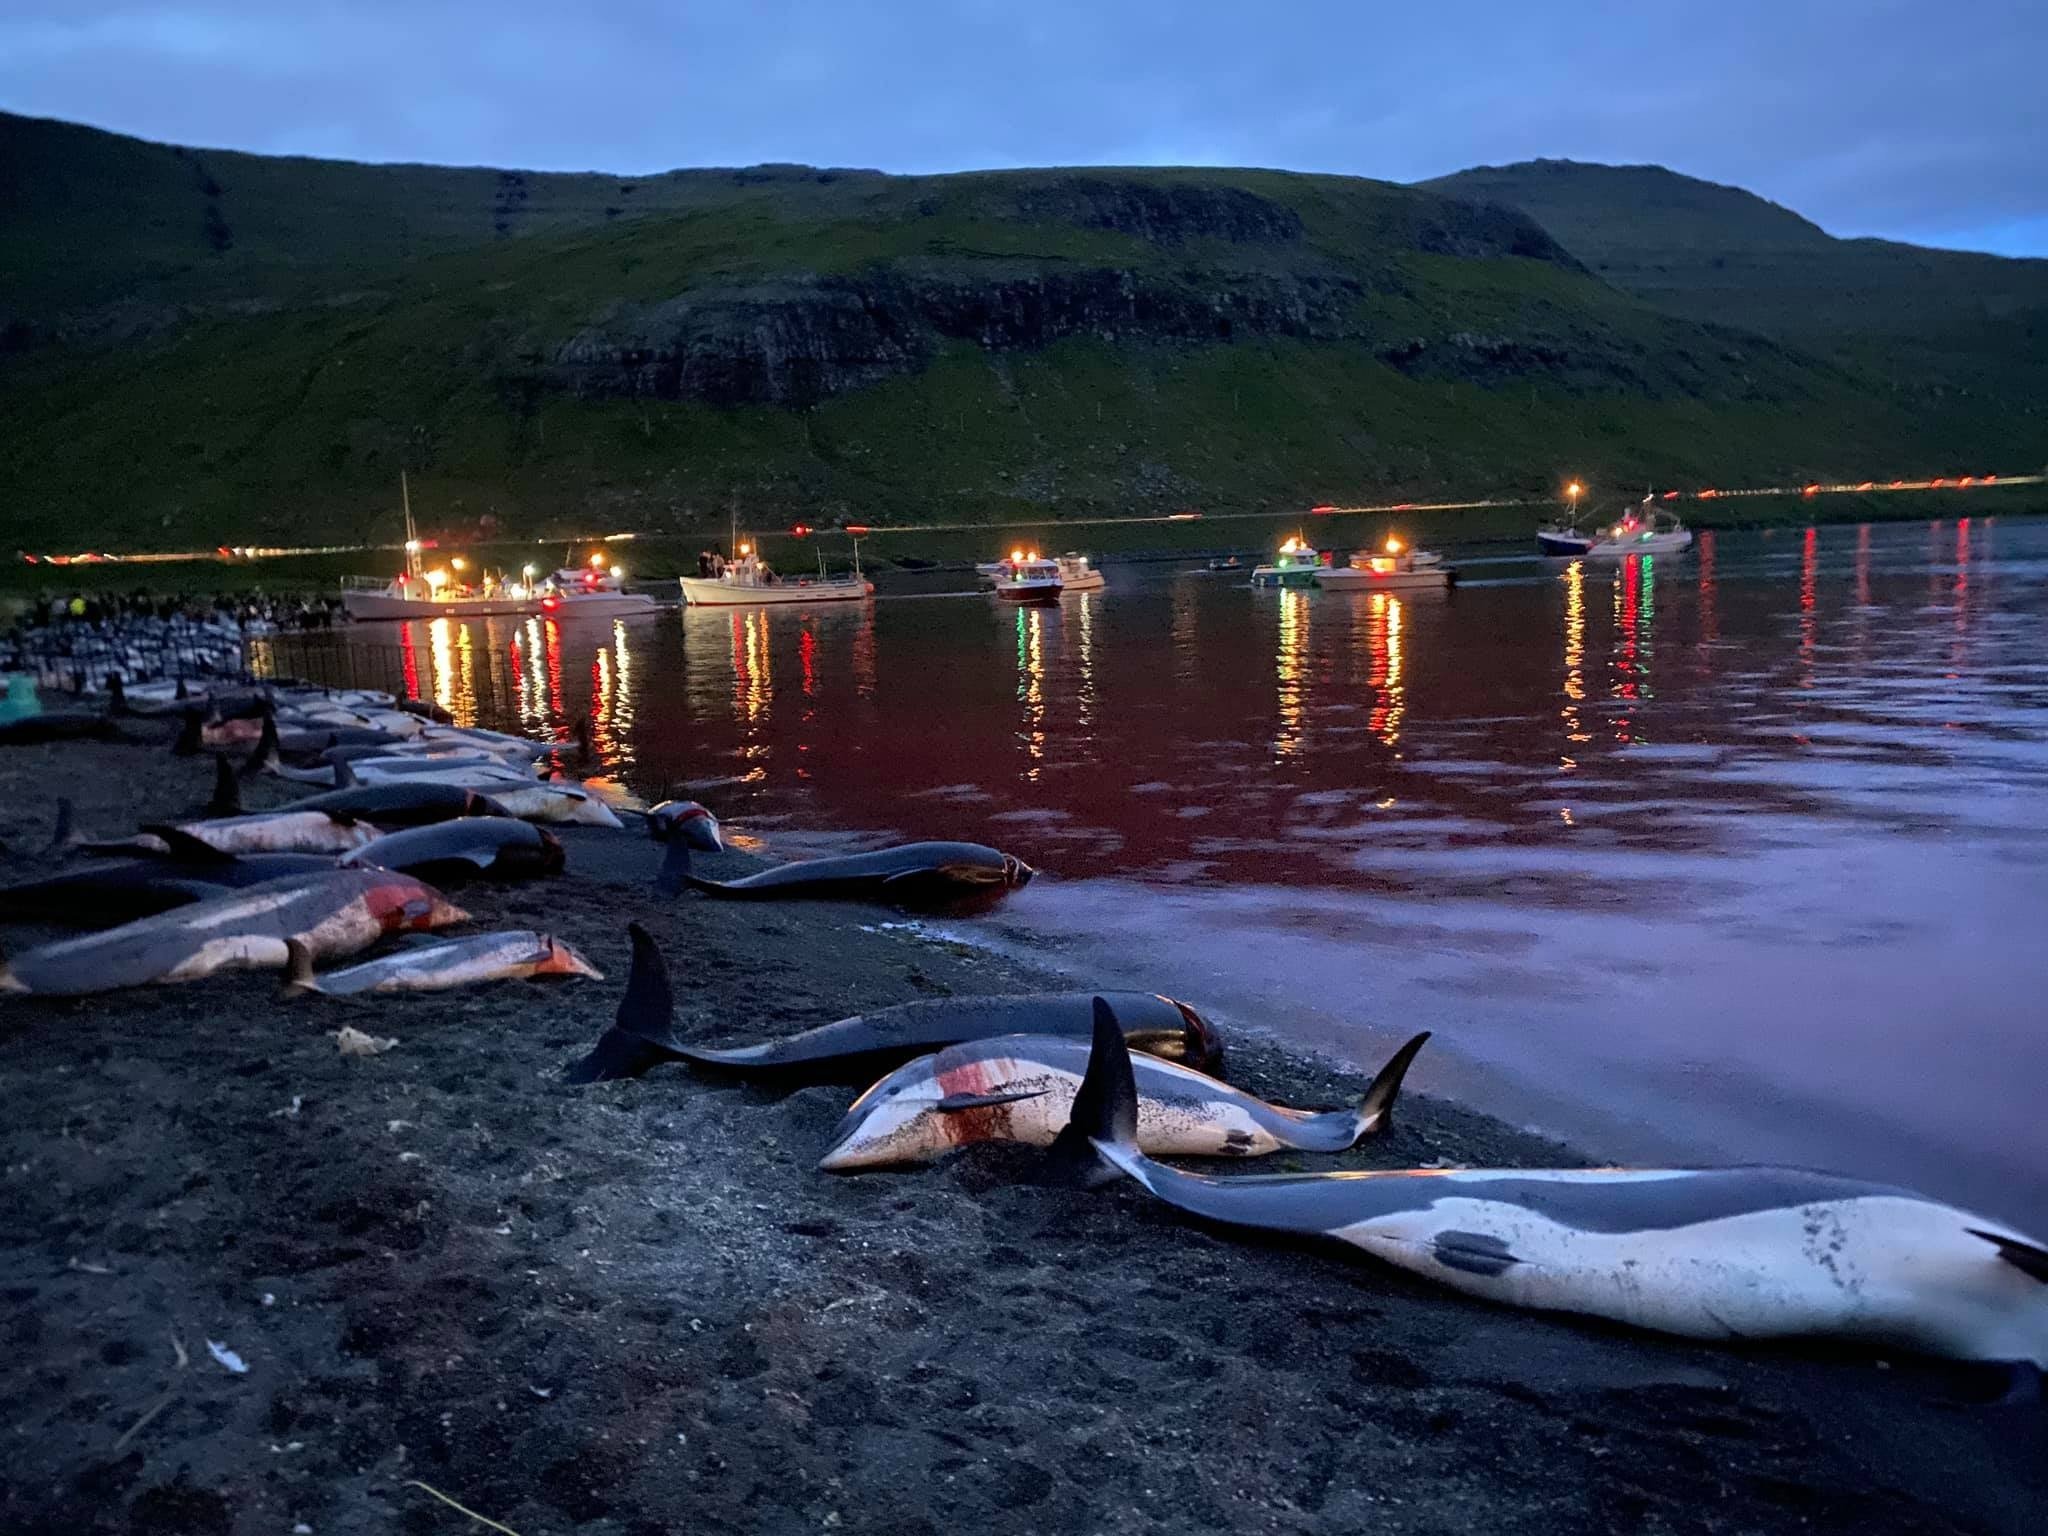 The carcasses of dead white-sided dolphins lie on a beach after being pulled from the blood-stained water on the island of Eysturoy, part of the Faeroe Islands, Sept. 12, 2021. (IHA Photo)